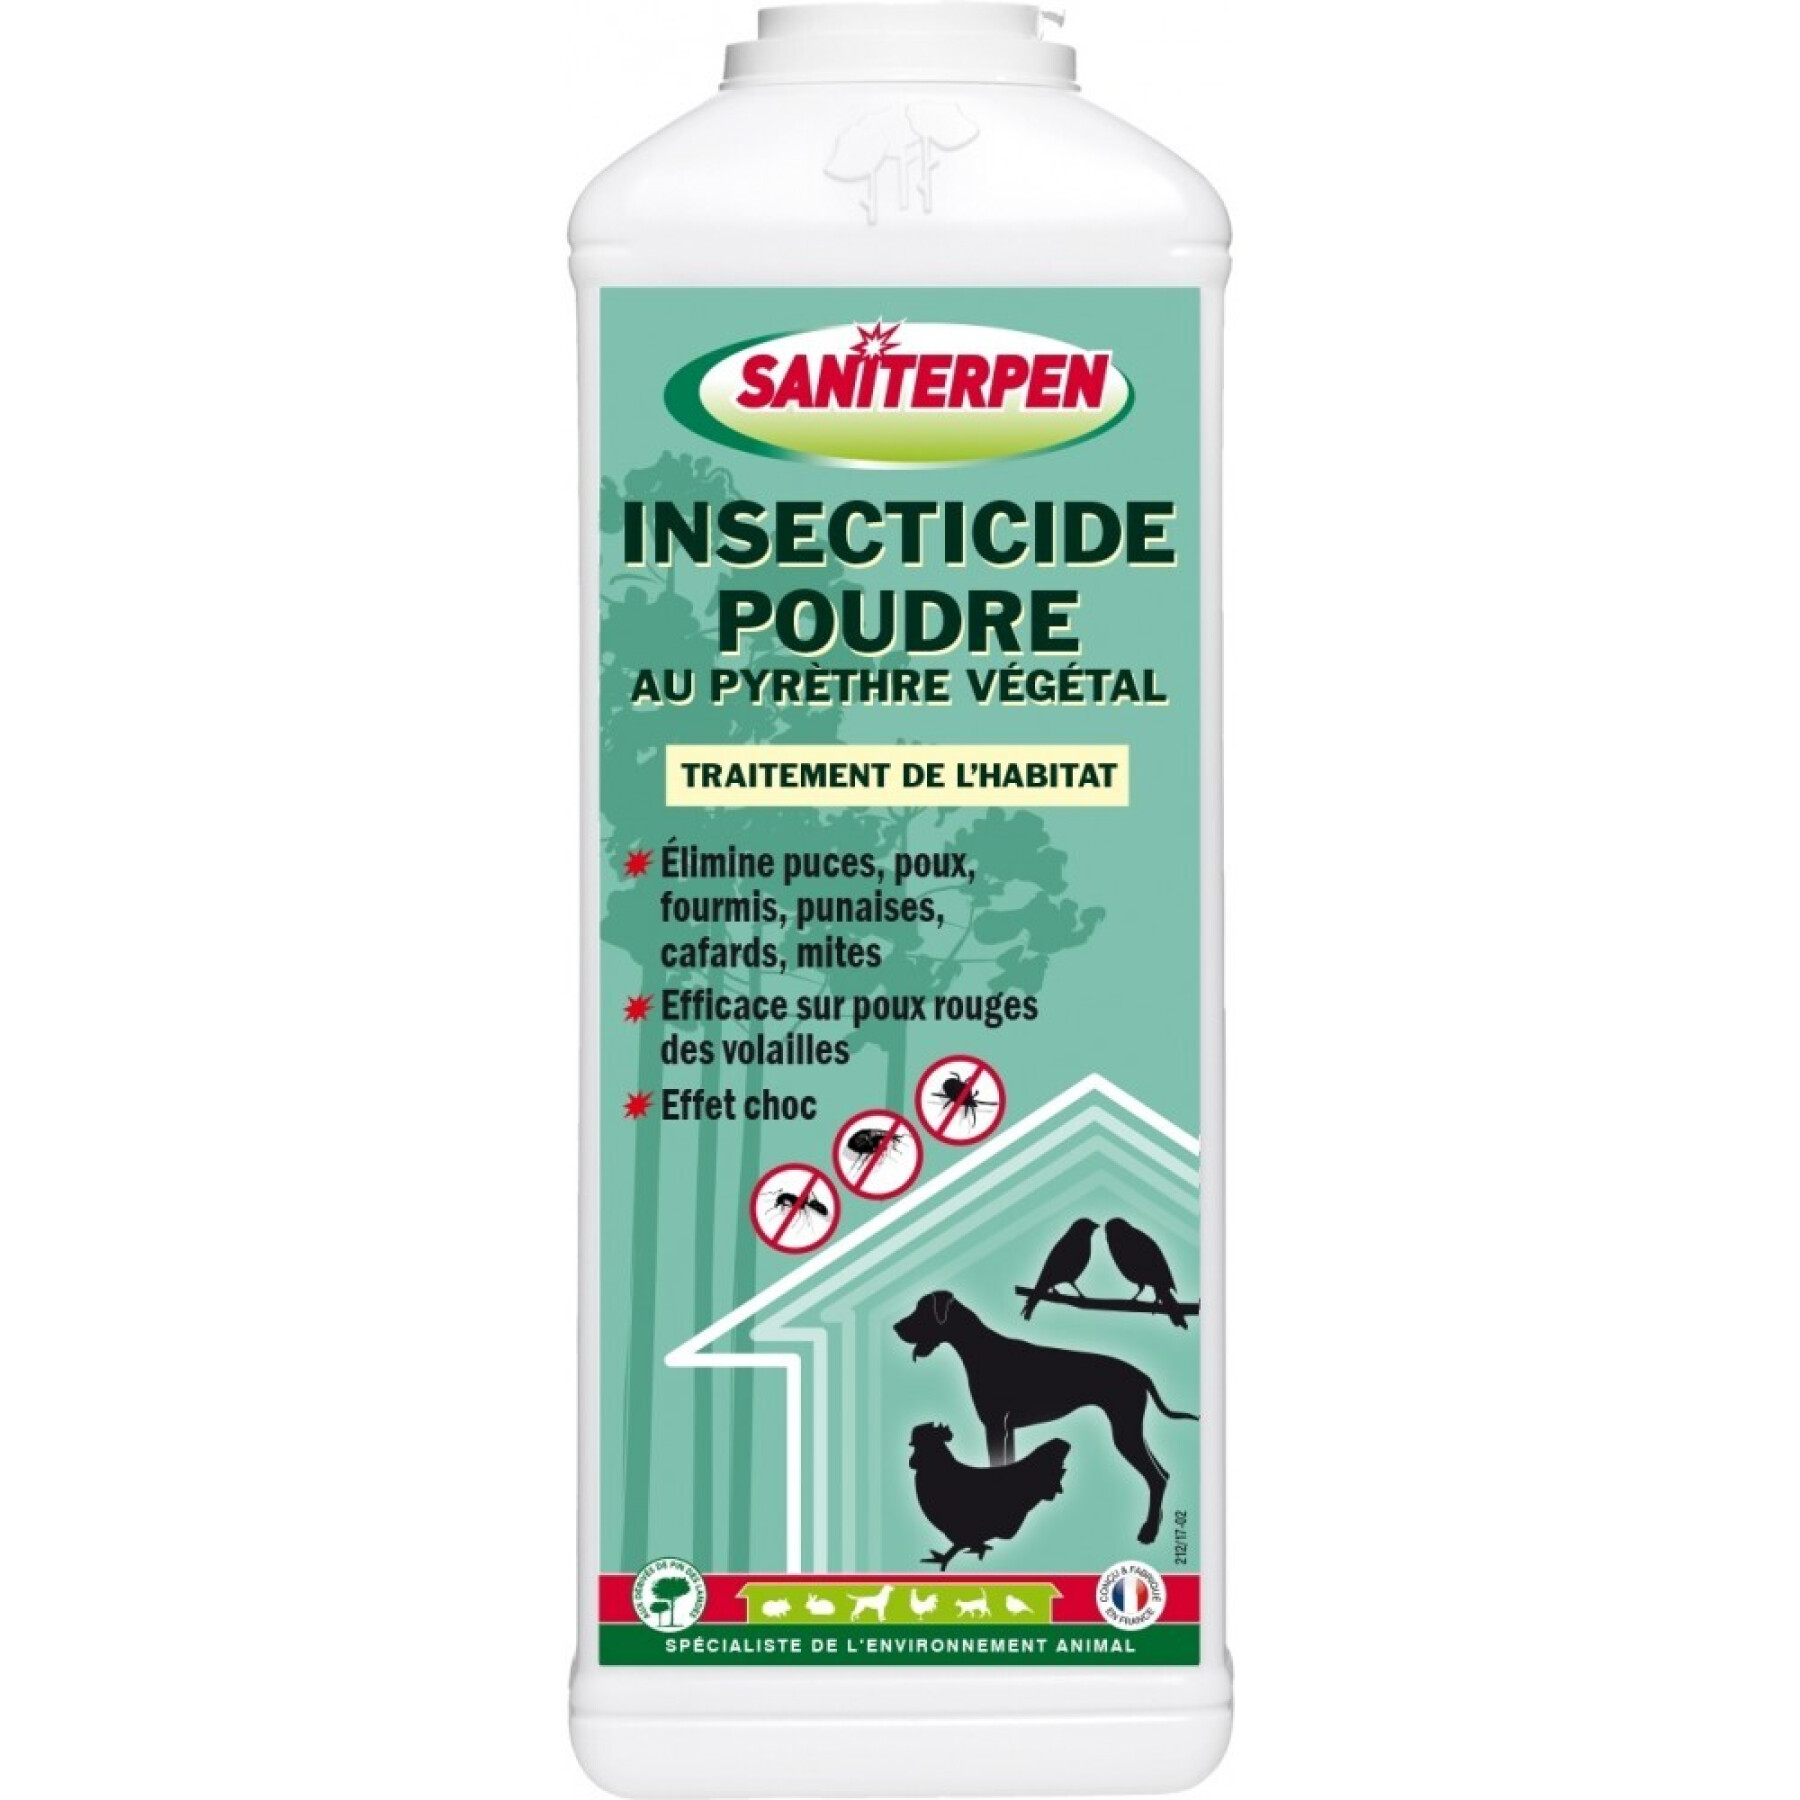 Insect repellent powder with vegetable pyrethrum Saniterpen